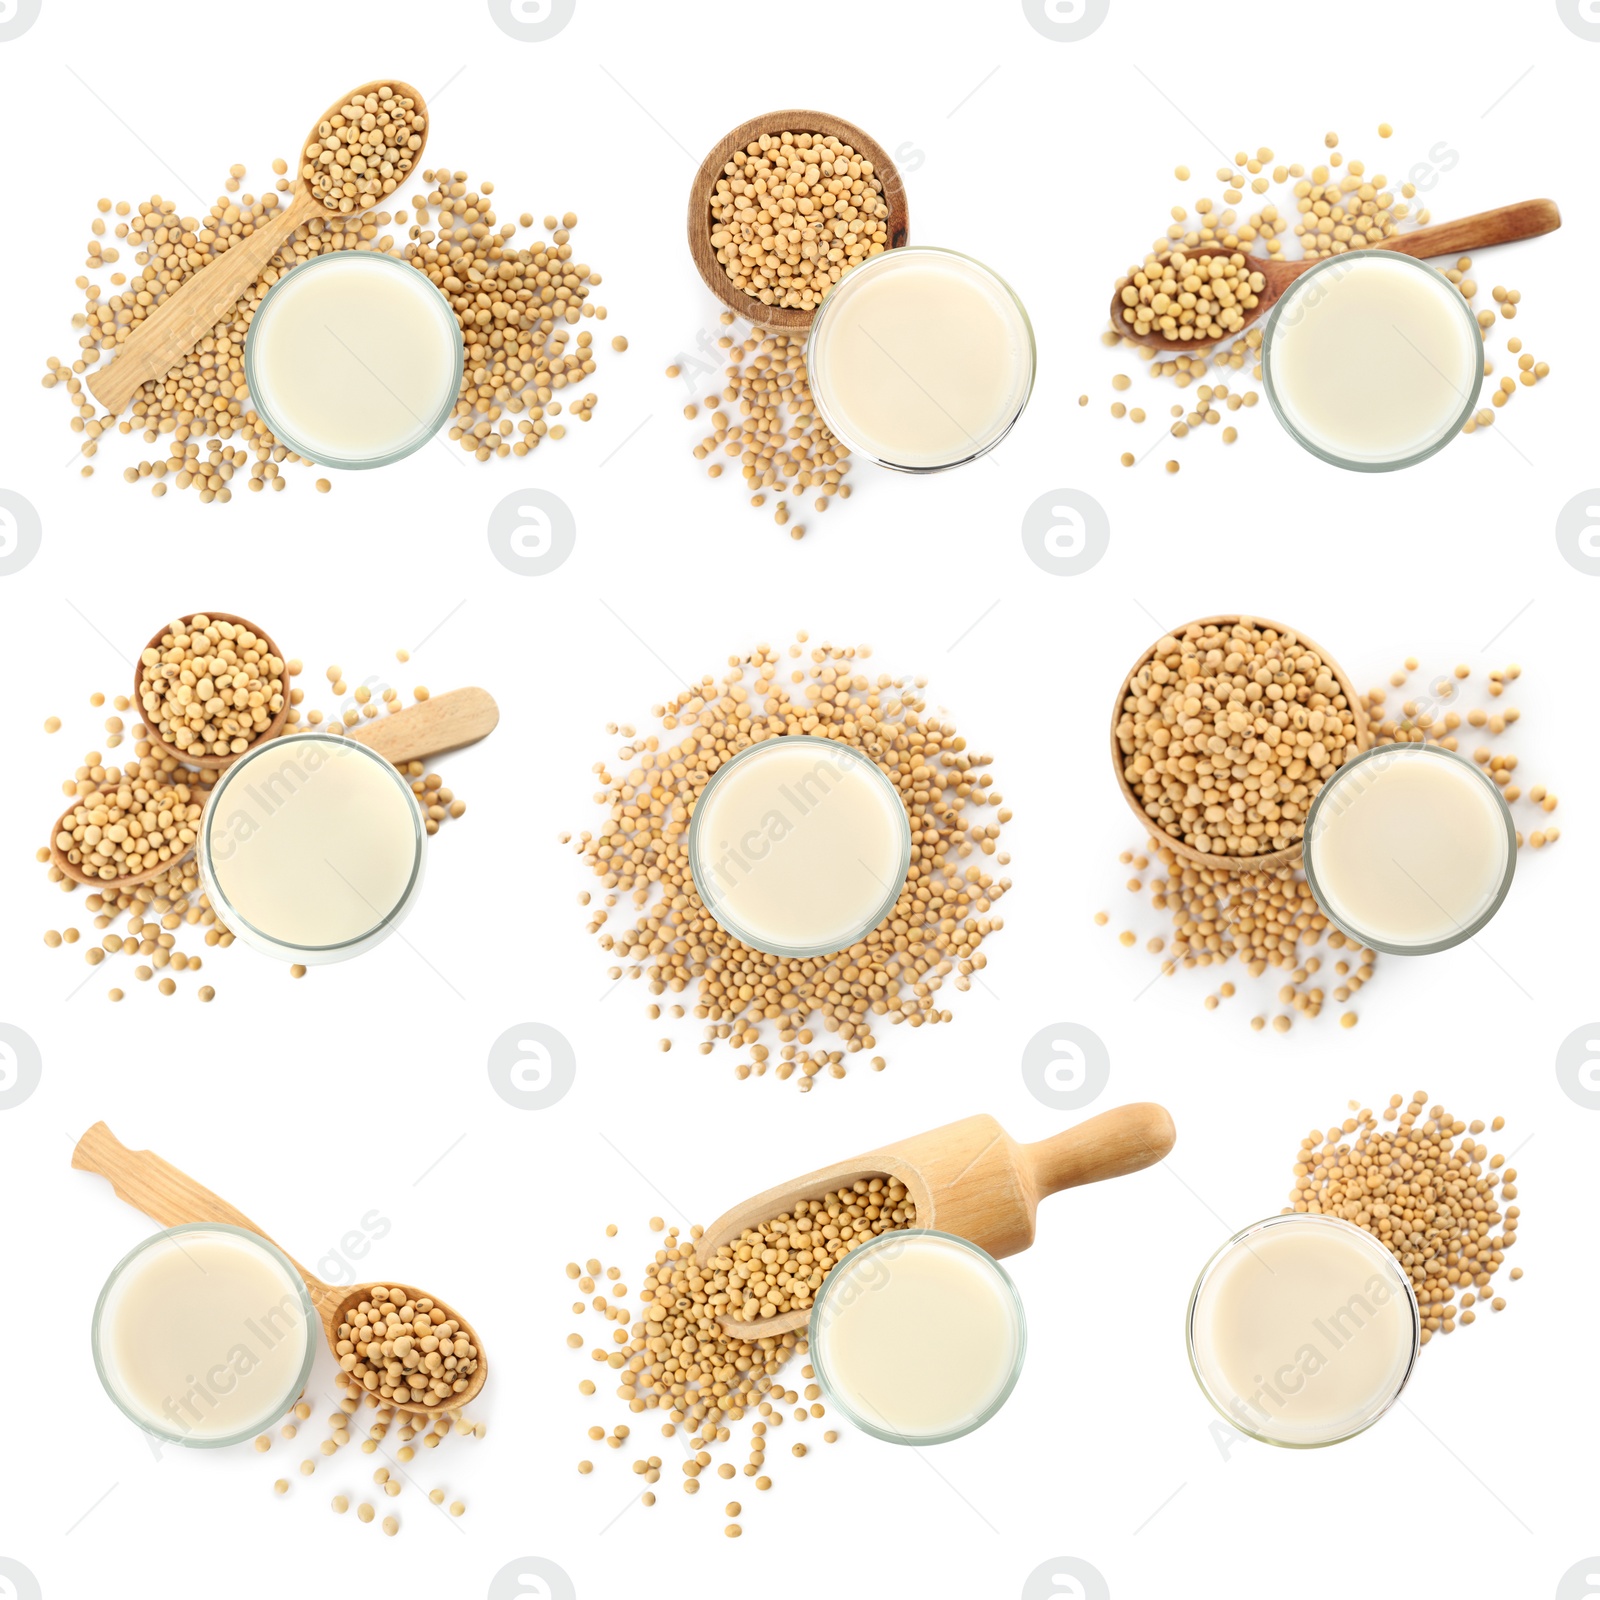 Image of Set with natural soy milk and beans on white background, top view